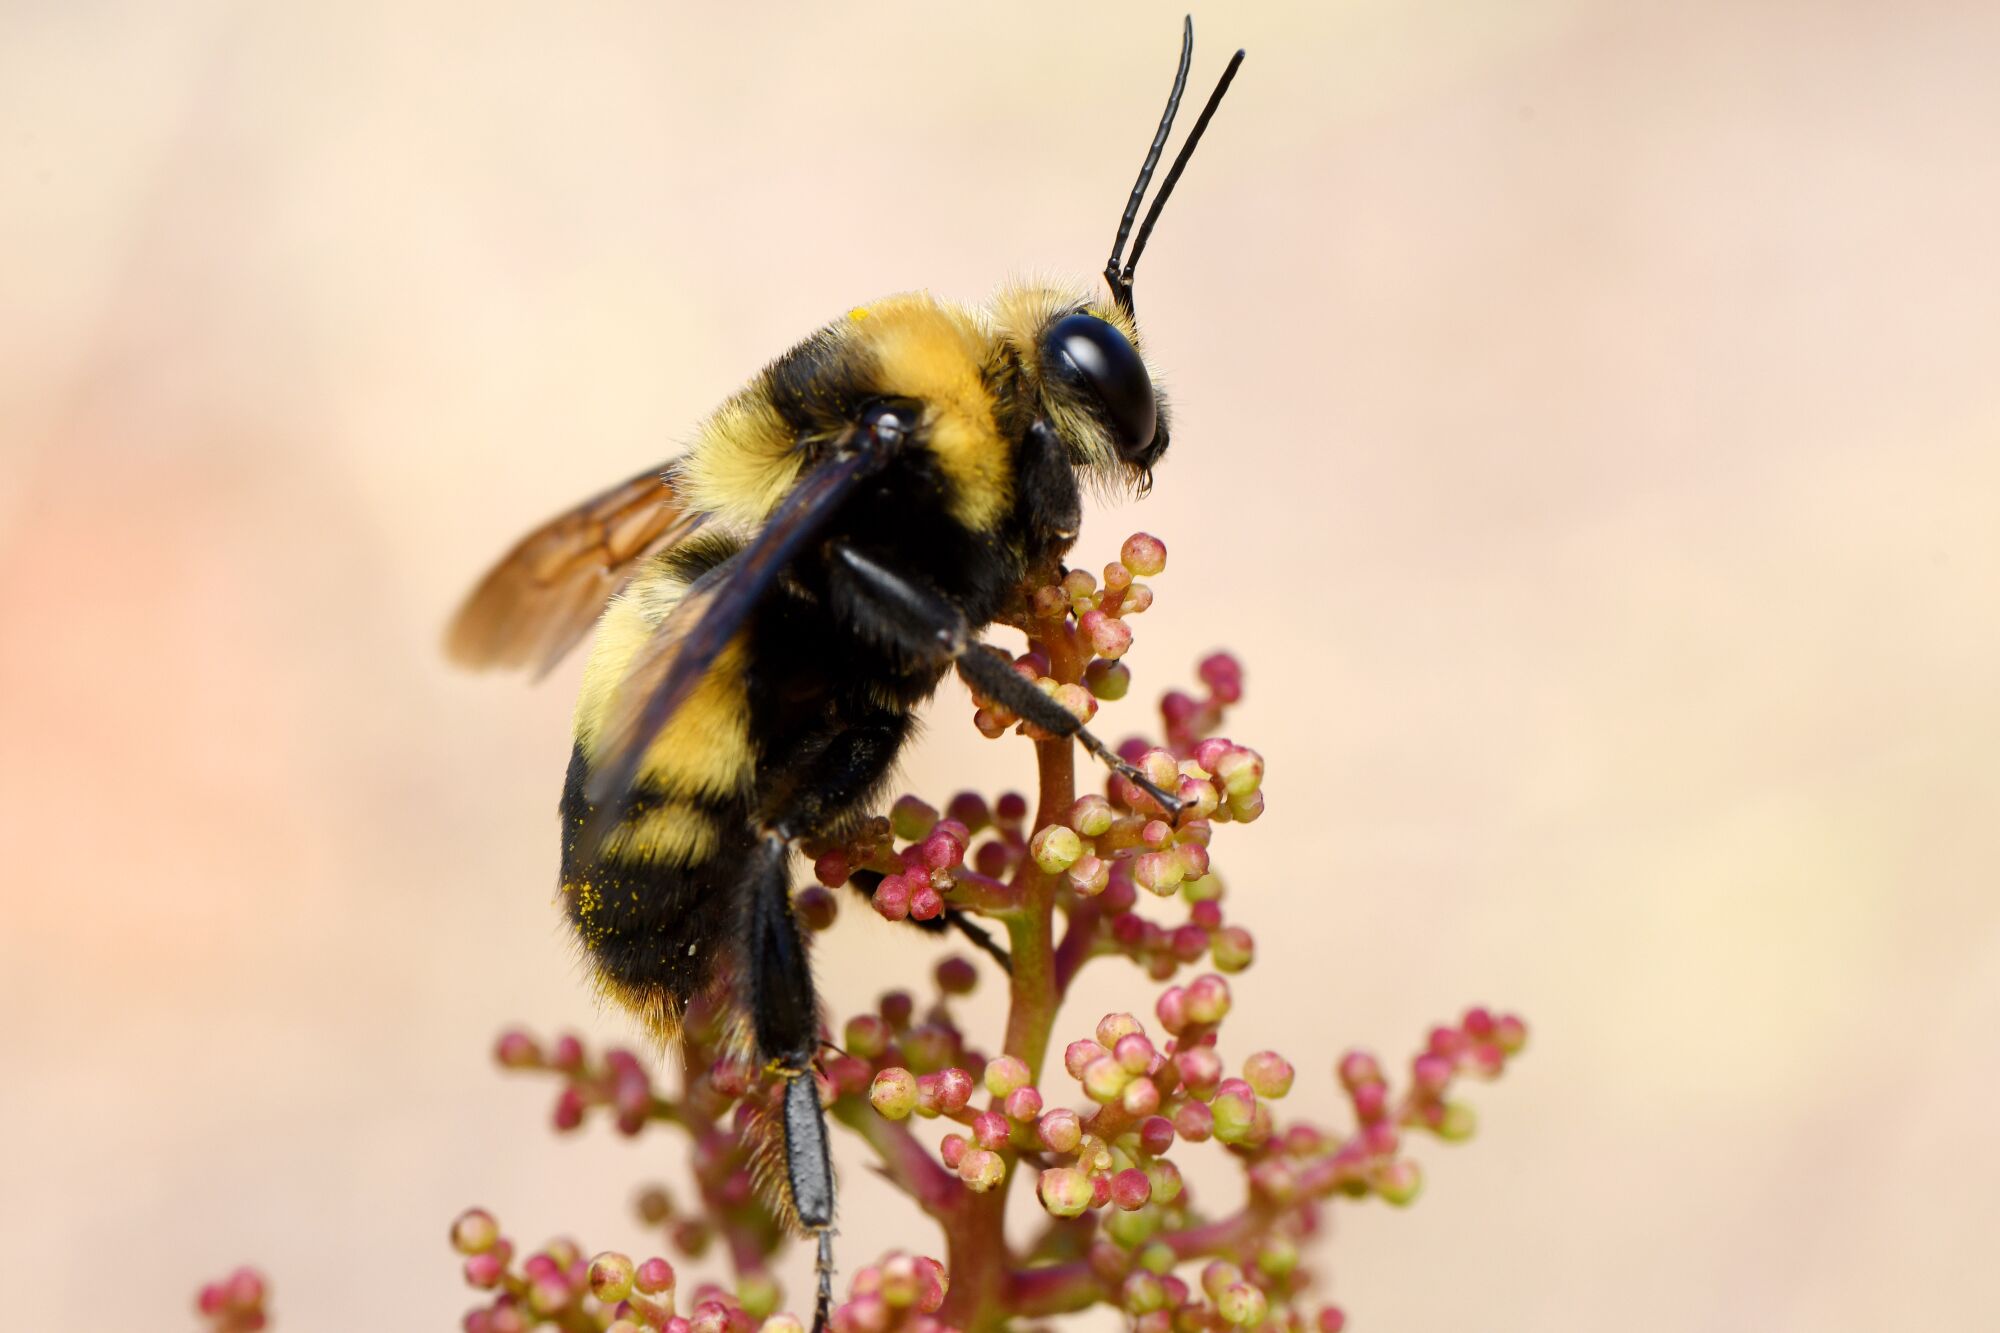 A closeup side view of a yellow-and-black bee on a plant.